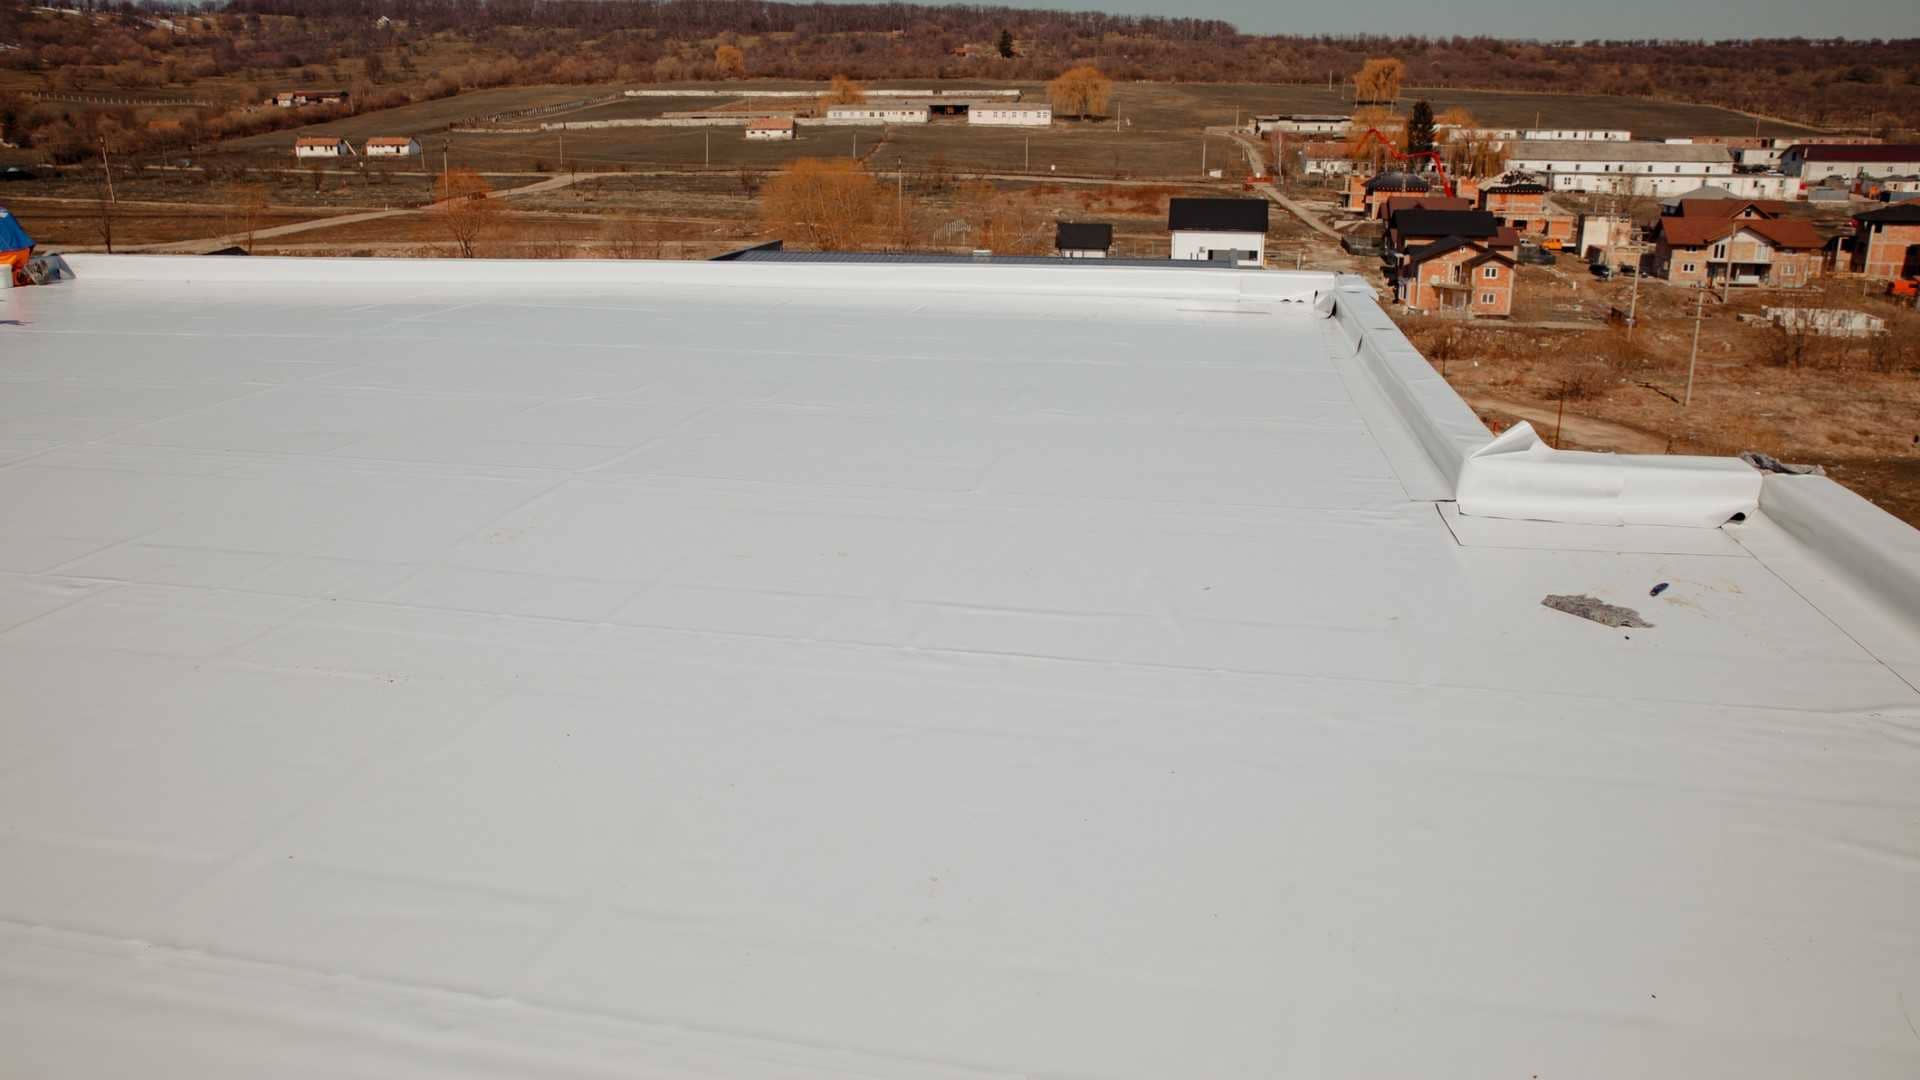 Flat TPO roofing in white